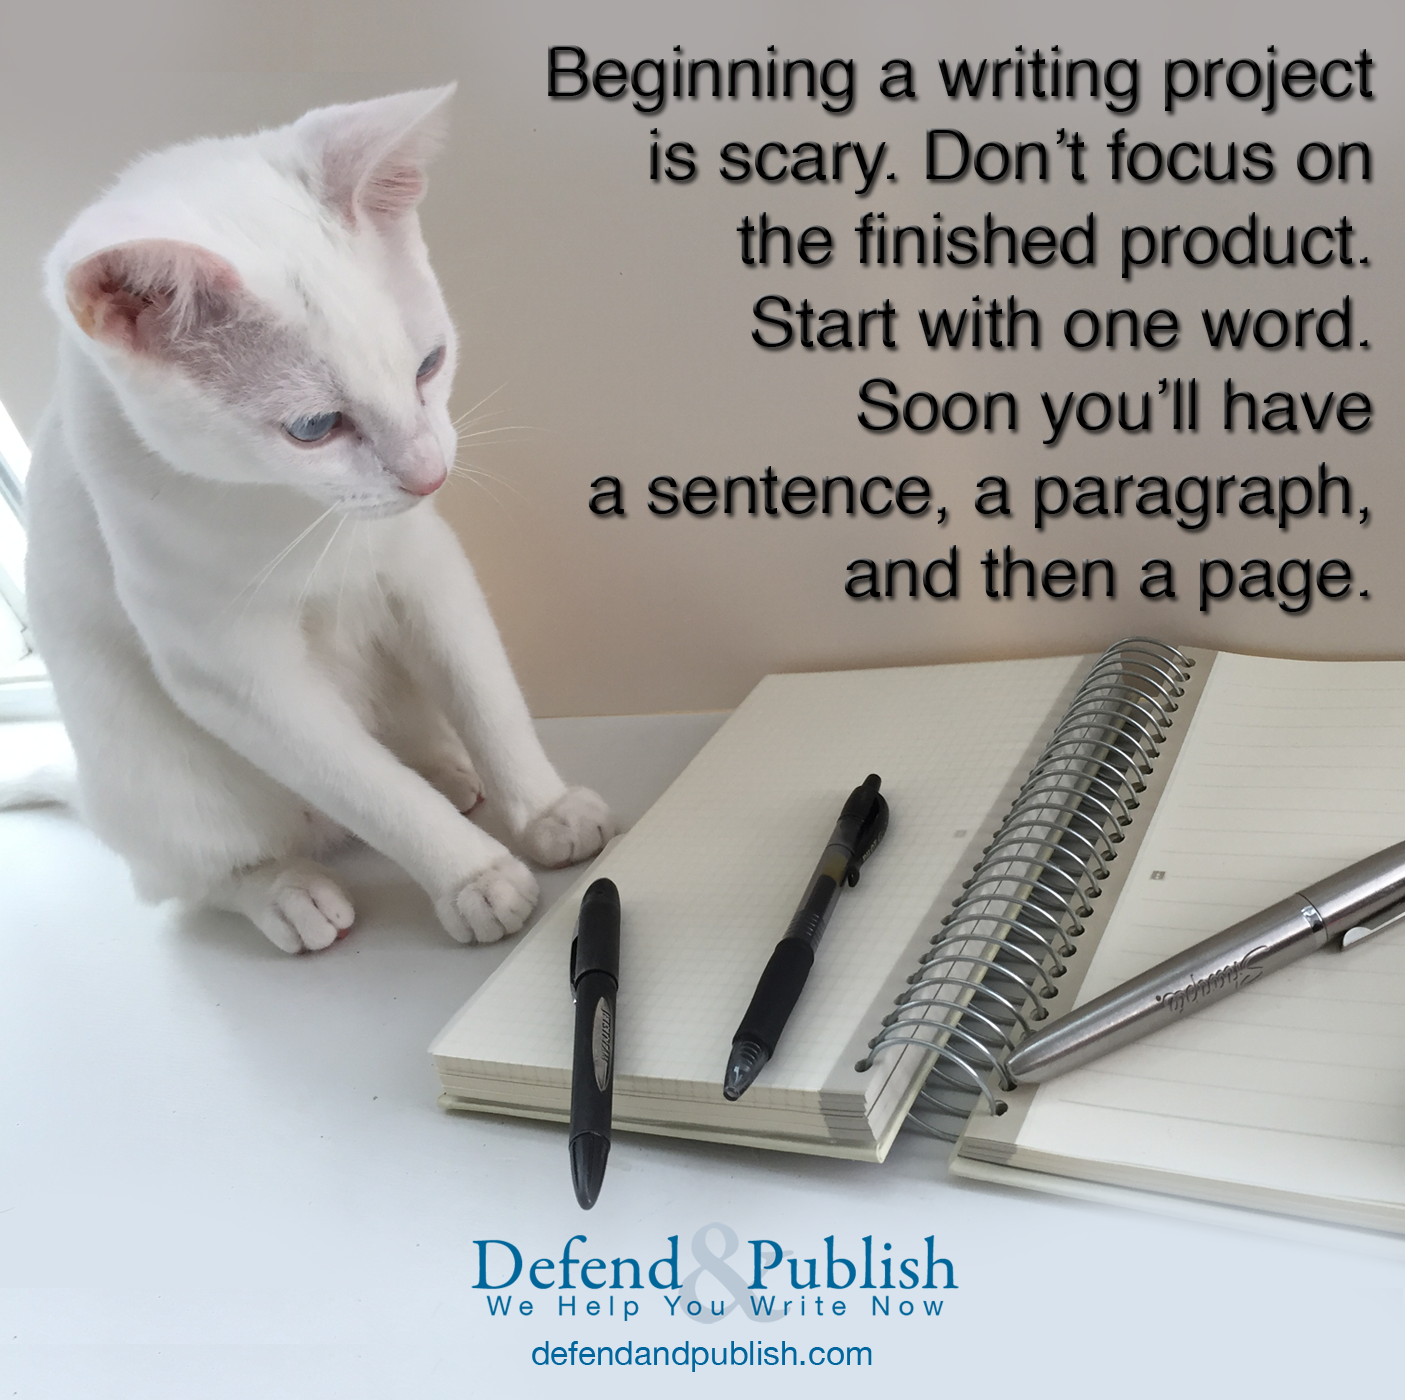 Beginning a writing project is scary. Don't focus on the finished product. Start with one word. Soon you'll have a sentence, a paragraph, and then a page.